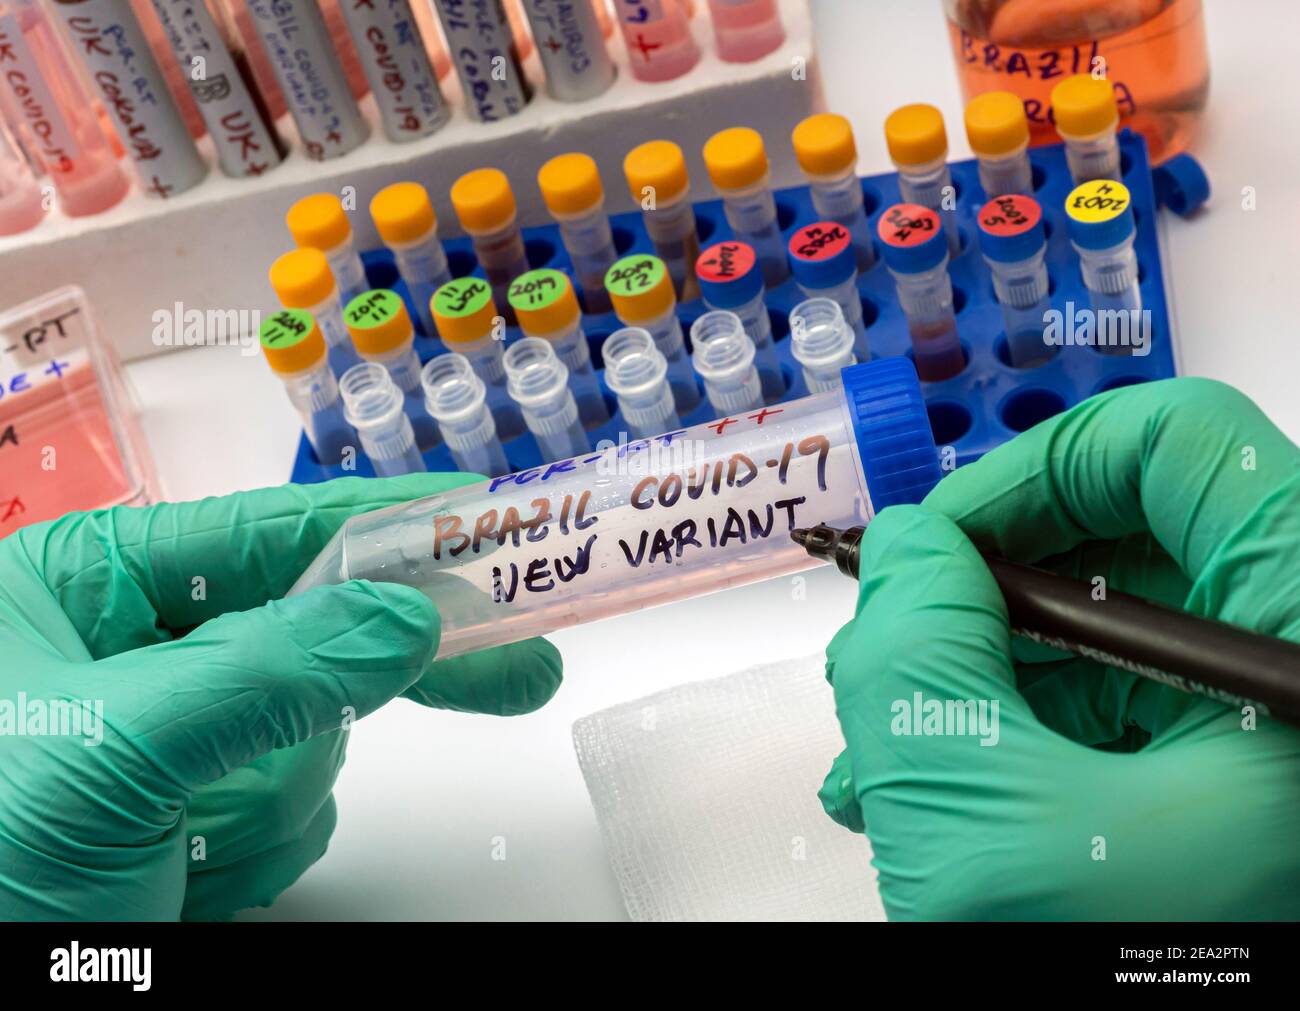 Scientist writes in a vial new variant of covid-19 virus from Brazil detected in Minnesota, concept image Stock Photo